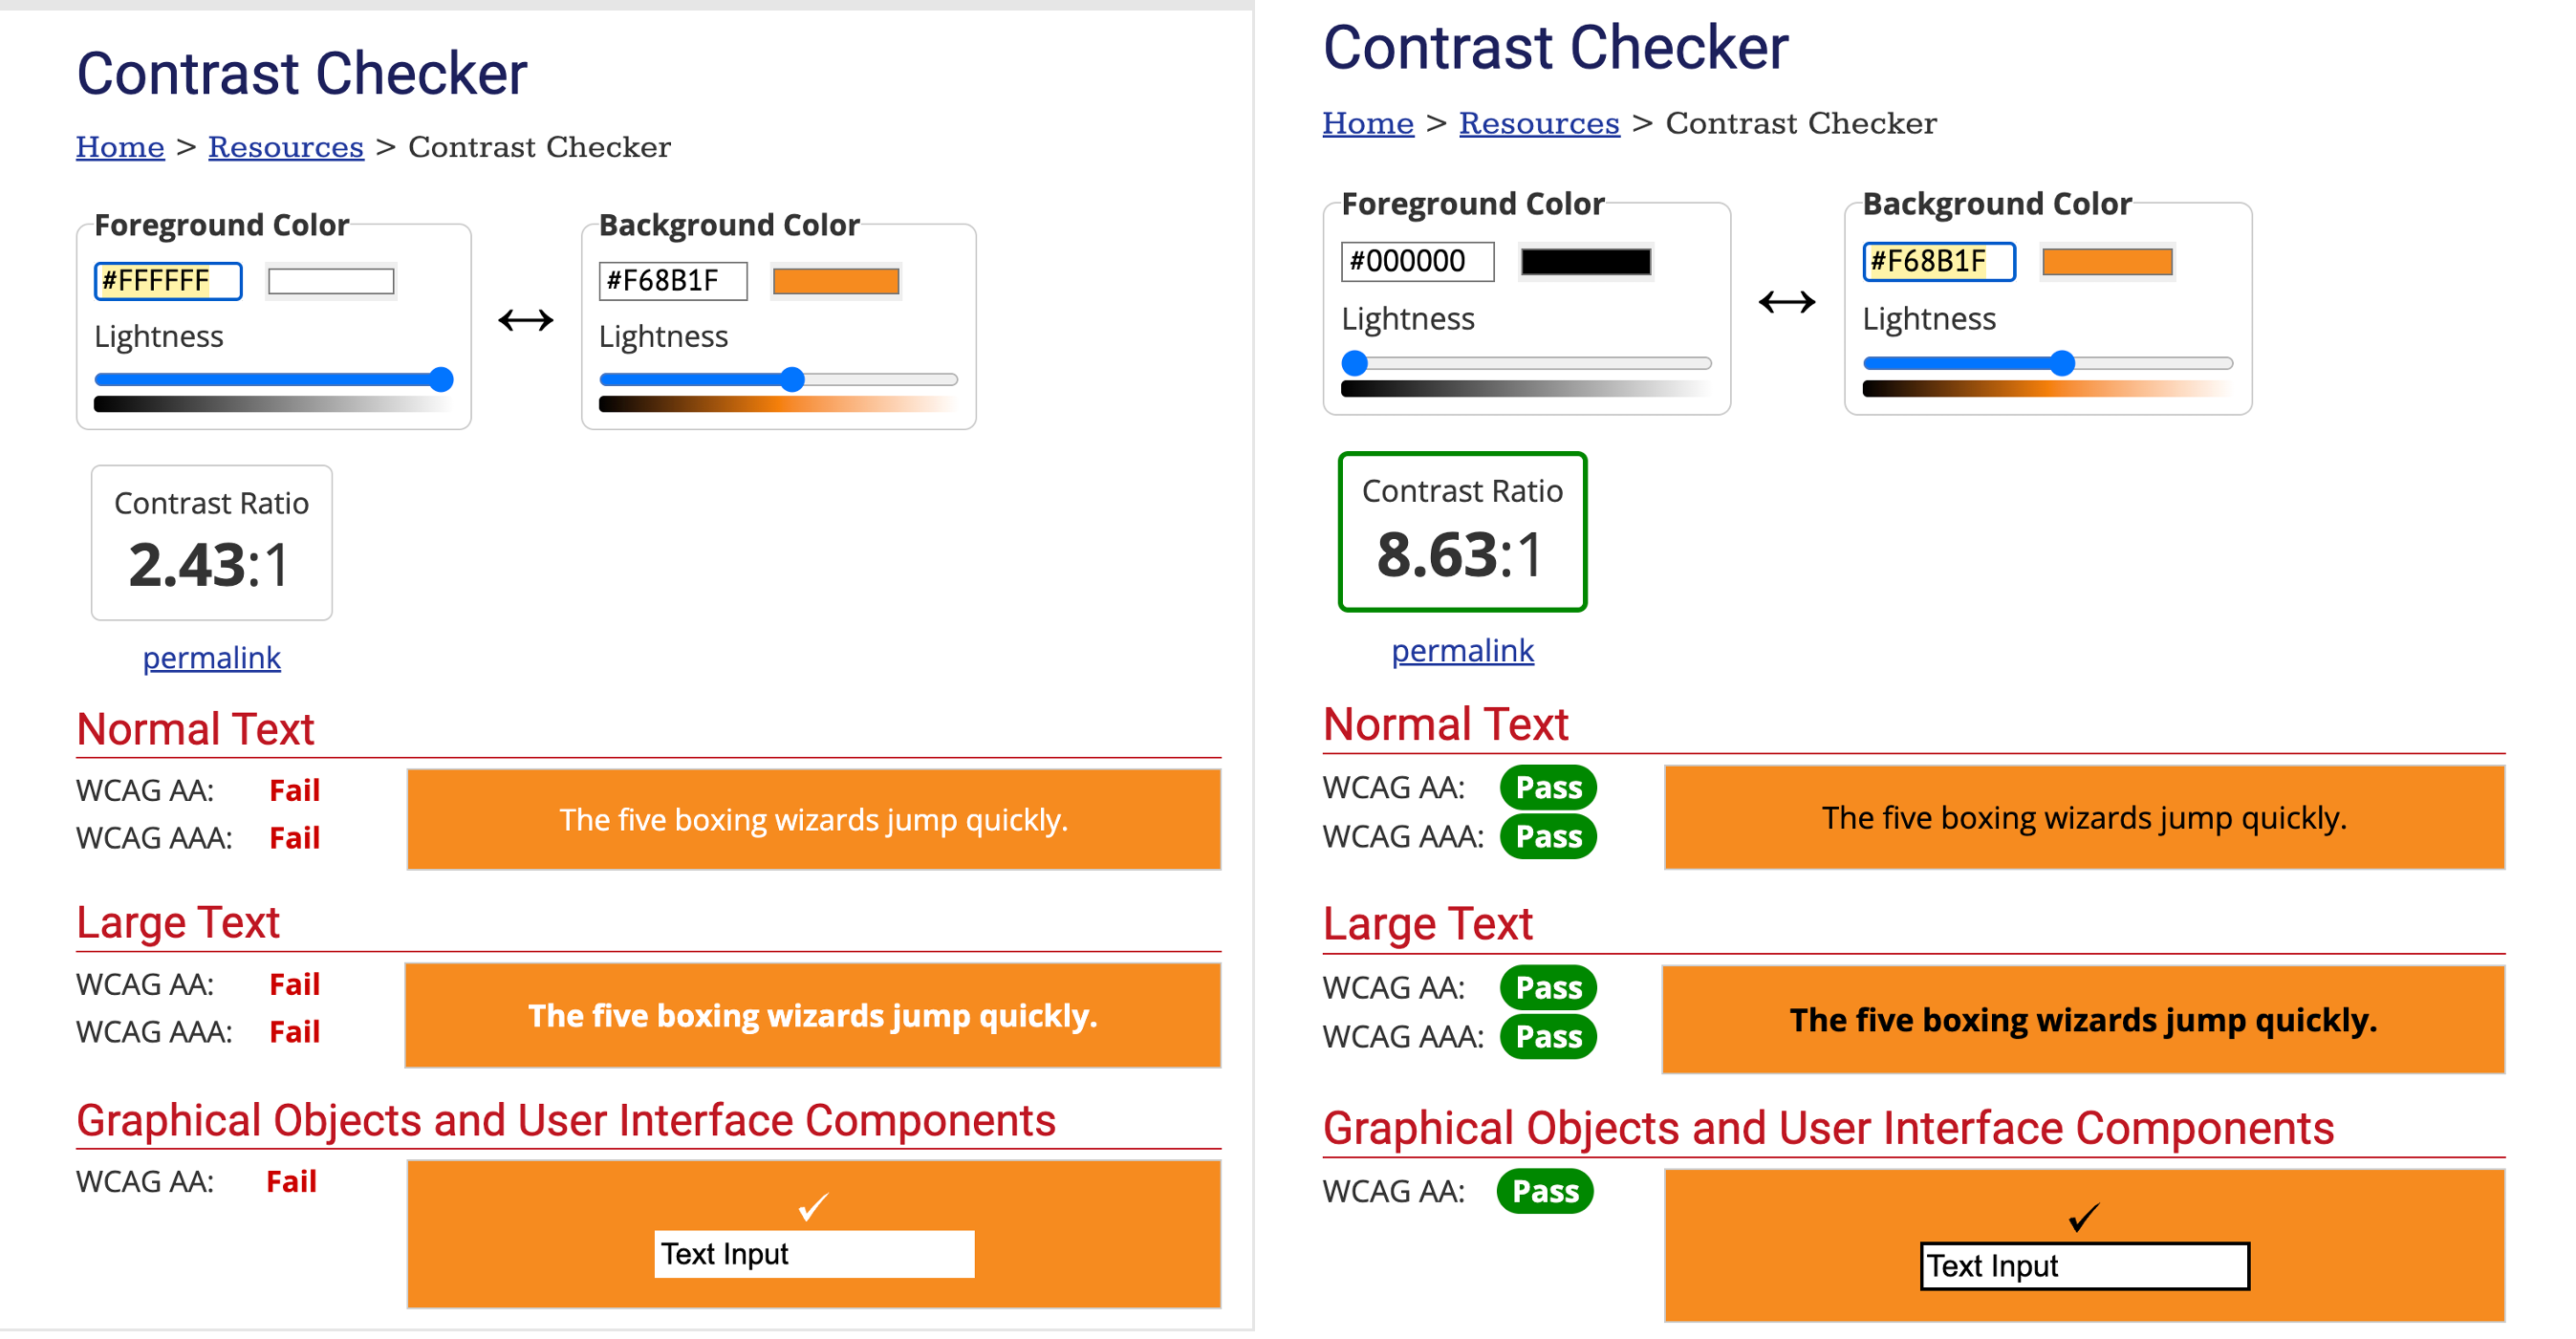 Screenshots of contrast checker with comparison of hex code #FFFFFF white foreground text with hex code #F68B1F orange background text versus hex code #000000 black foreground text on the same orange background. The white text fails WCAG AA and AAA, but the black text passes.